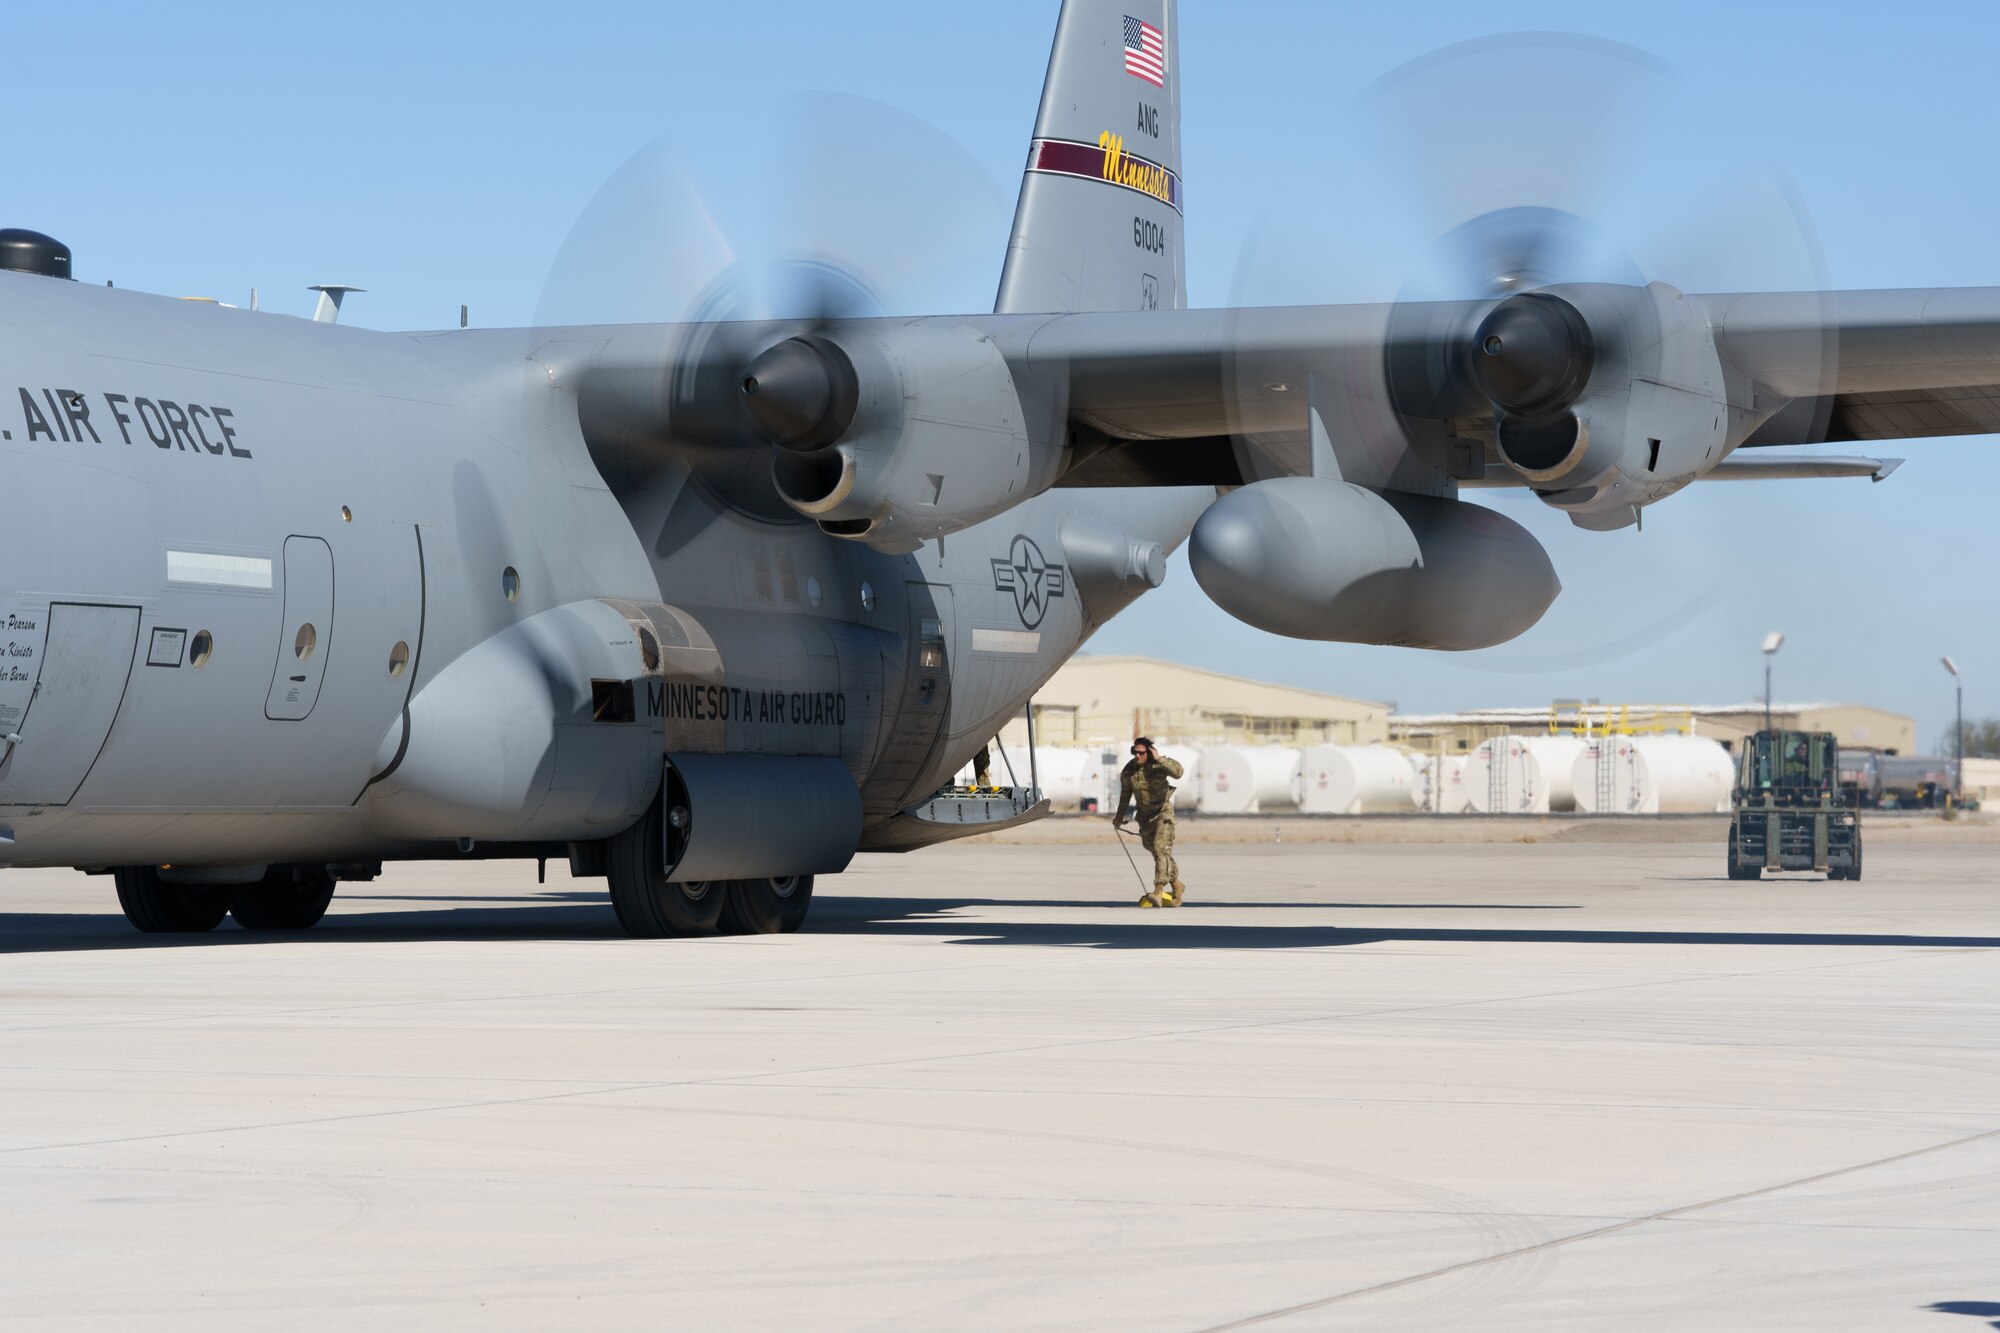 U.S. Air Force Master Sgt. Casey Jaeger, left, and Master Sgt. Brian Prestegaard, 133rd Air Transportation Function, prepare to conduct an engine running offload from a C-130 Hercules in  Yuma, Ariz., Feb. 25, 2021.